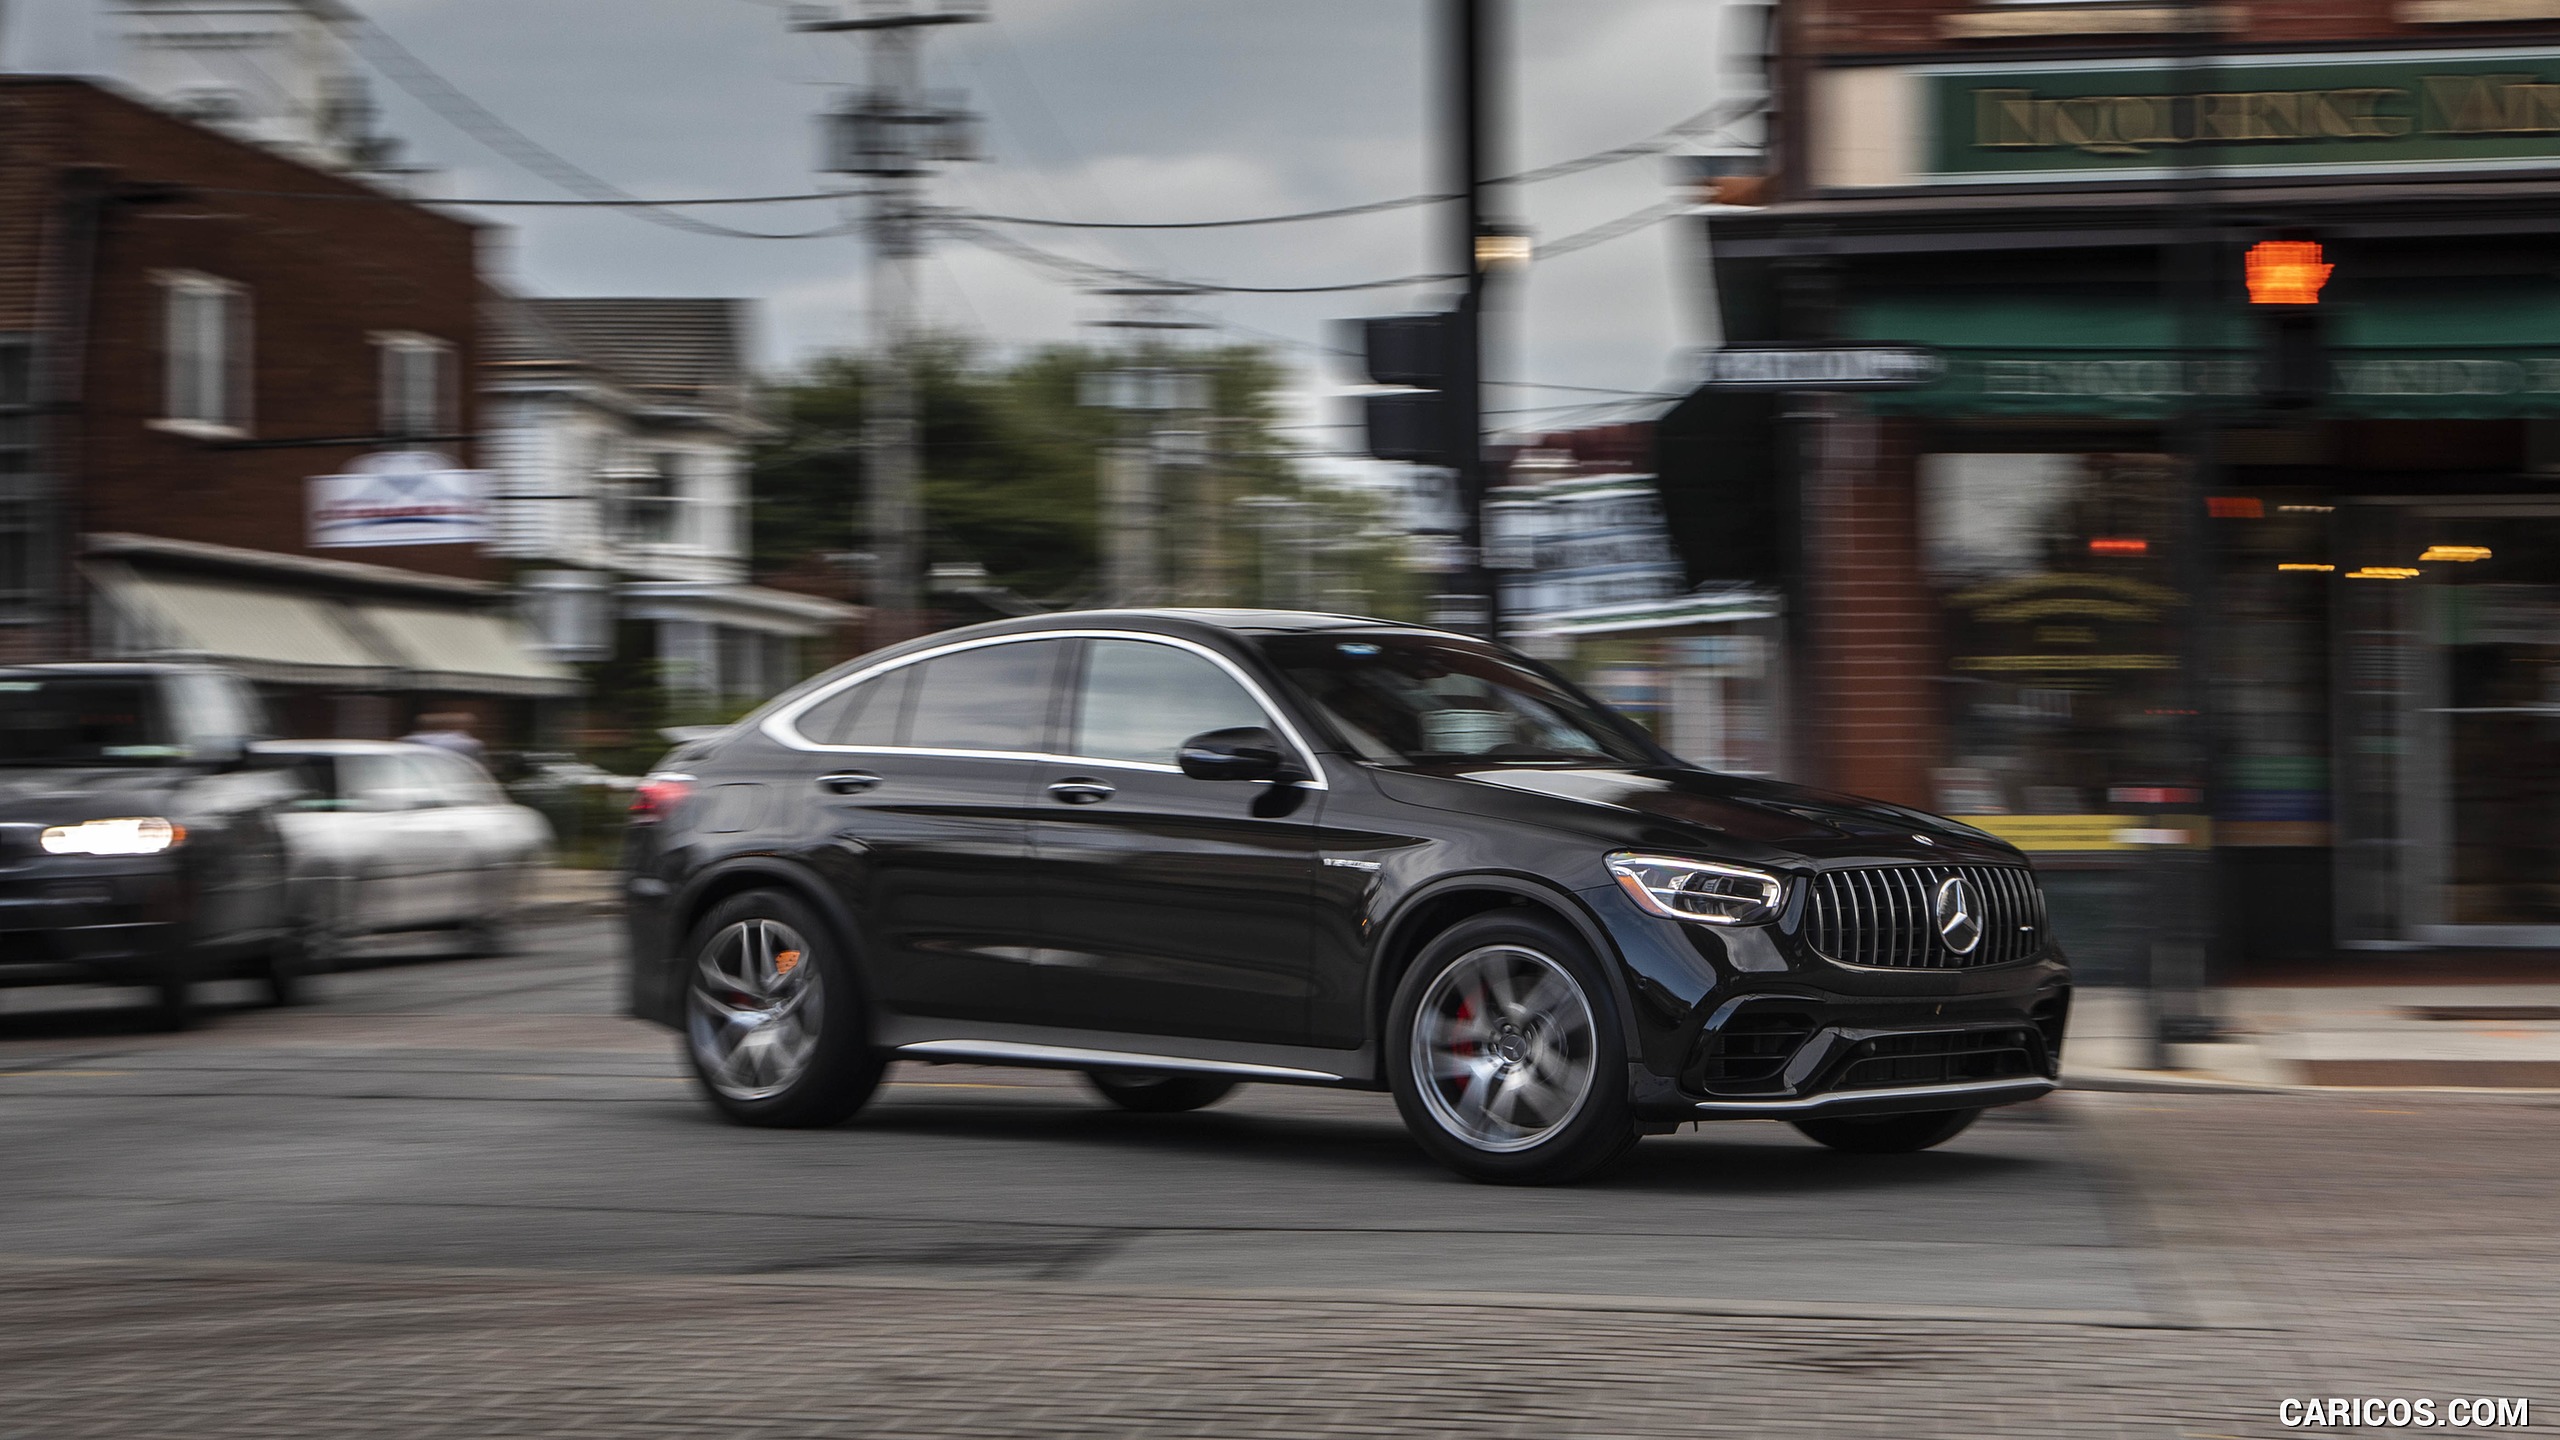 2020 Mercedes-AMG GLC 63 S Coupe (US-Spec) - Front Three-Quarter, #36 of 102